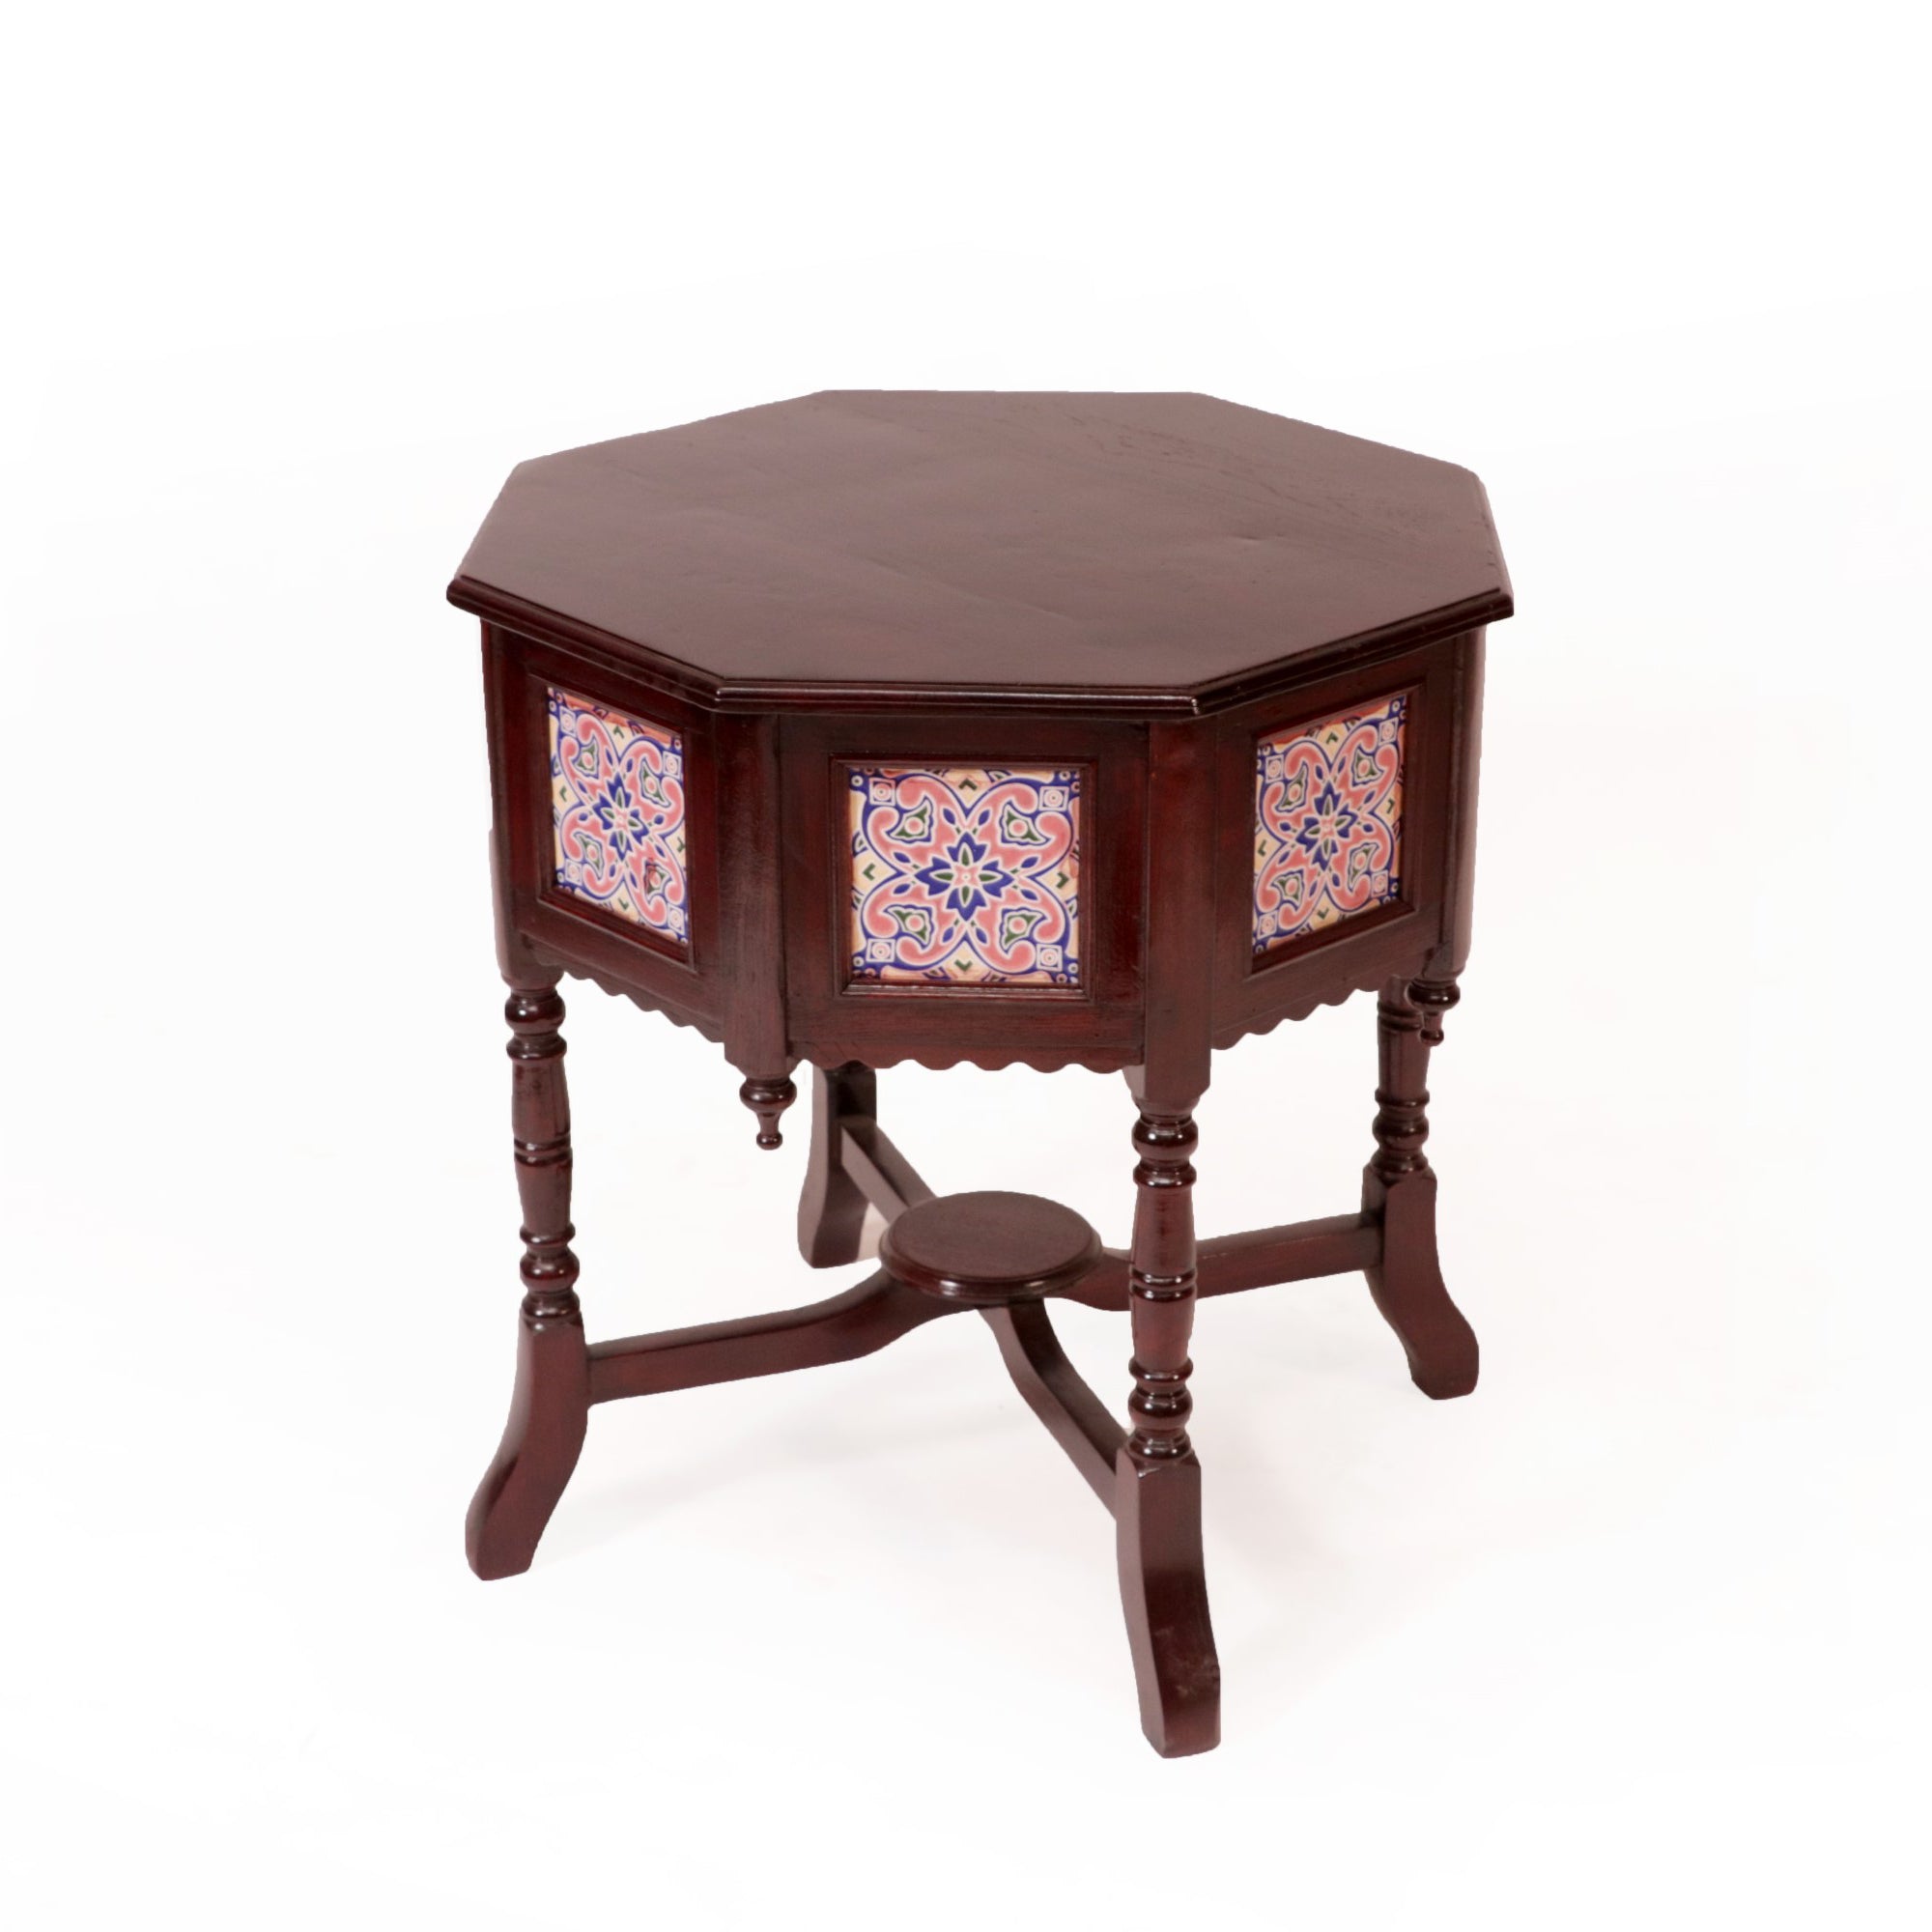 Classic Traditional Hexagonal Tiled Table End Table